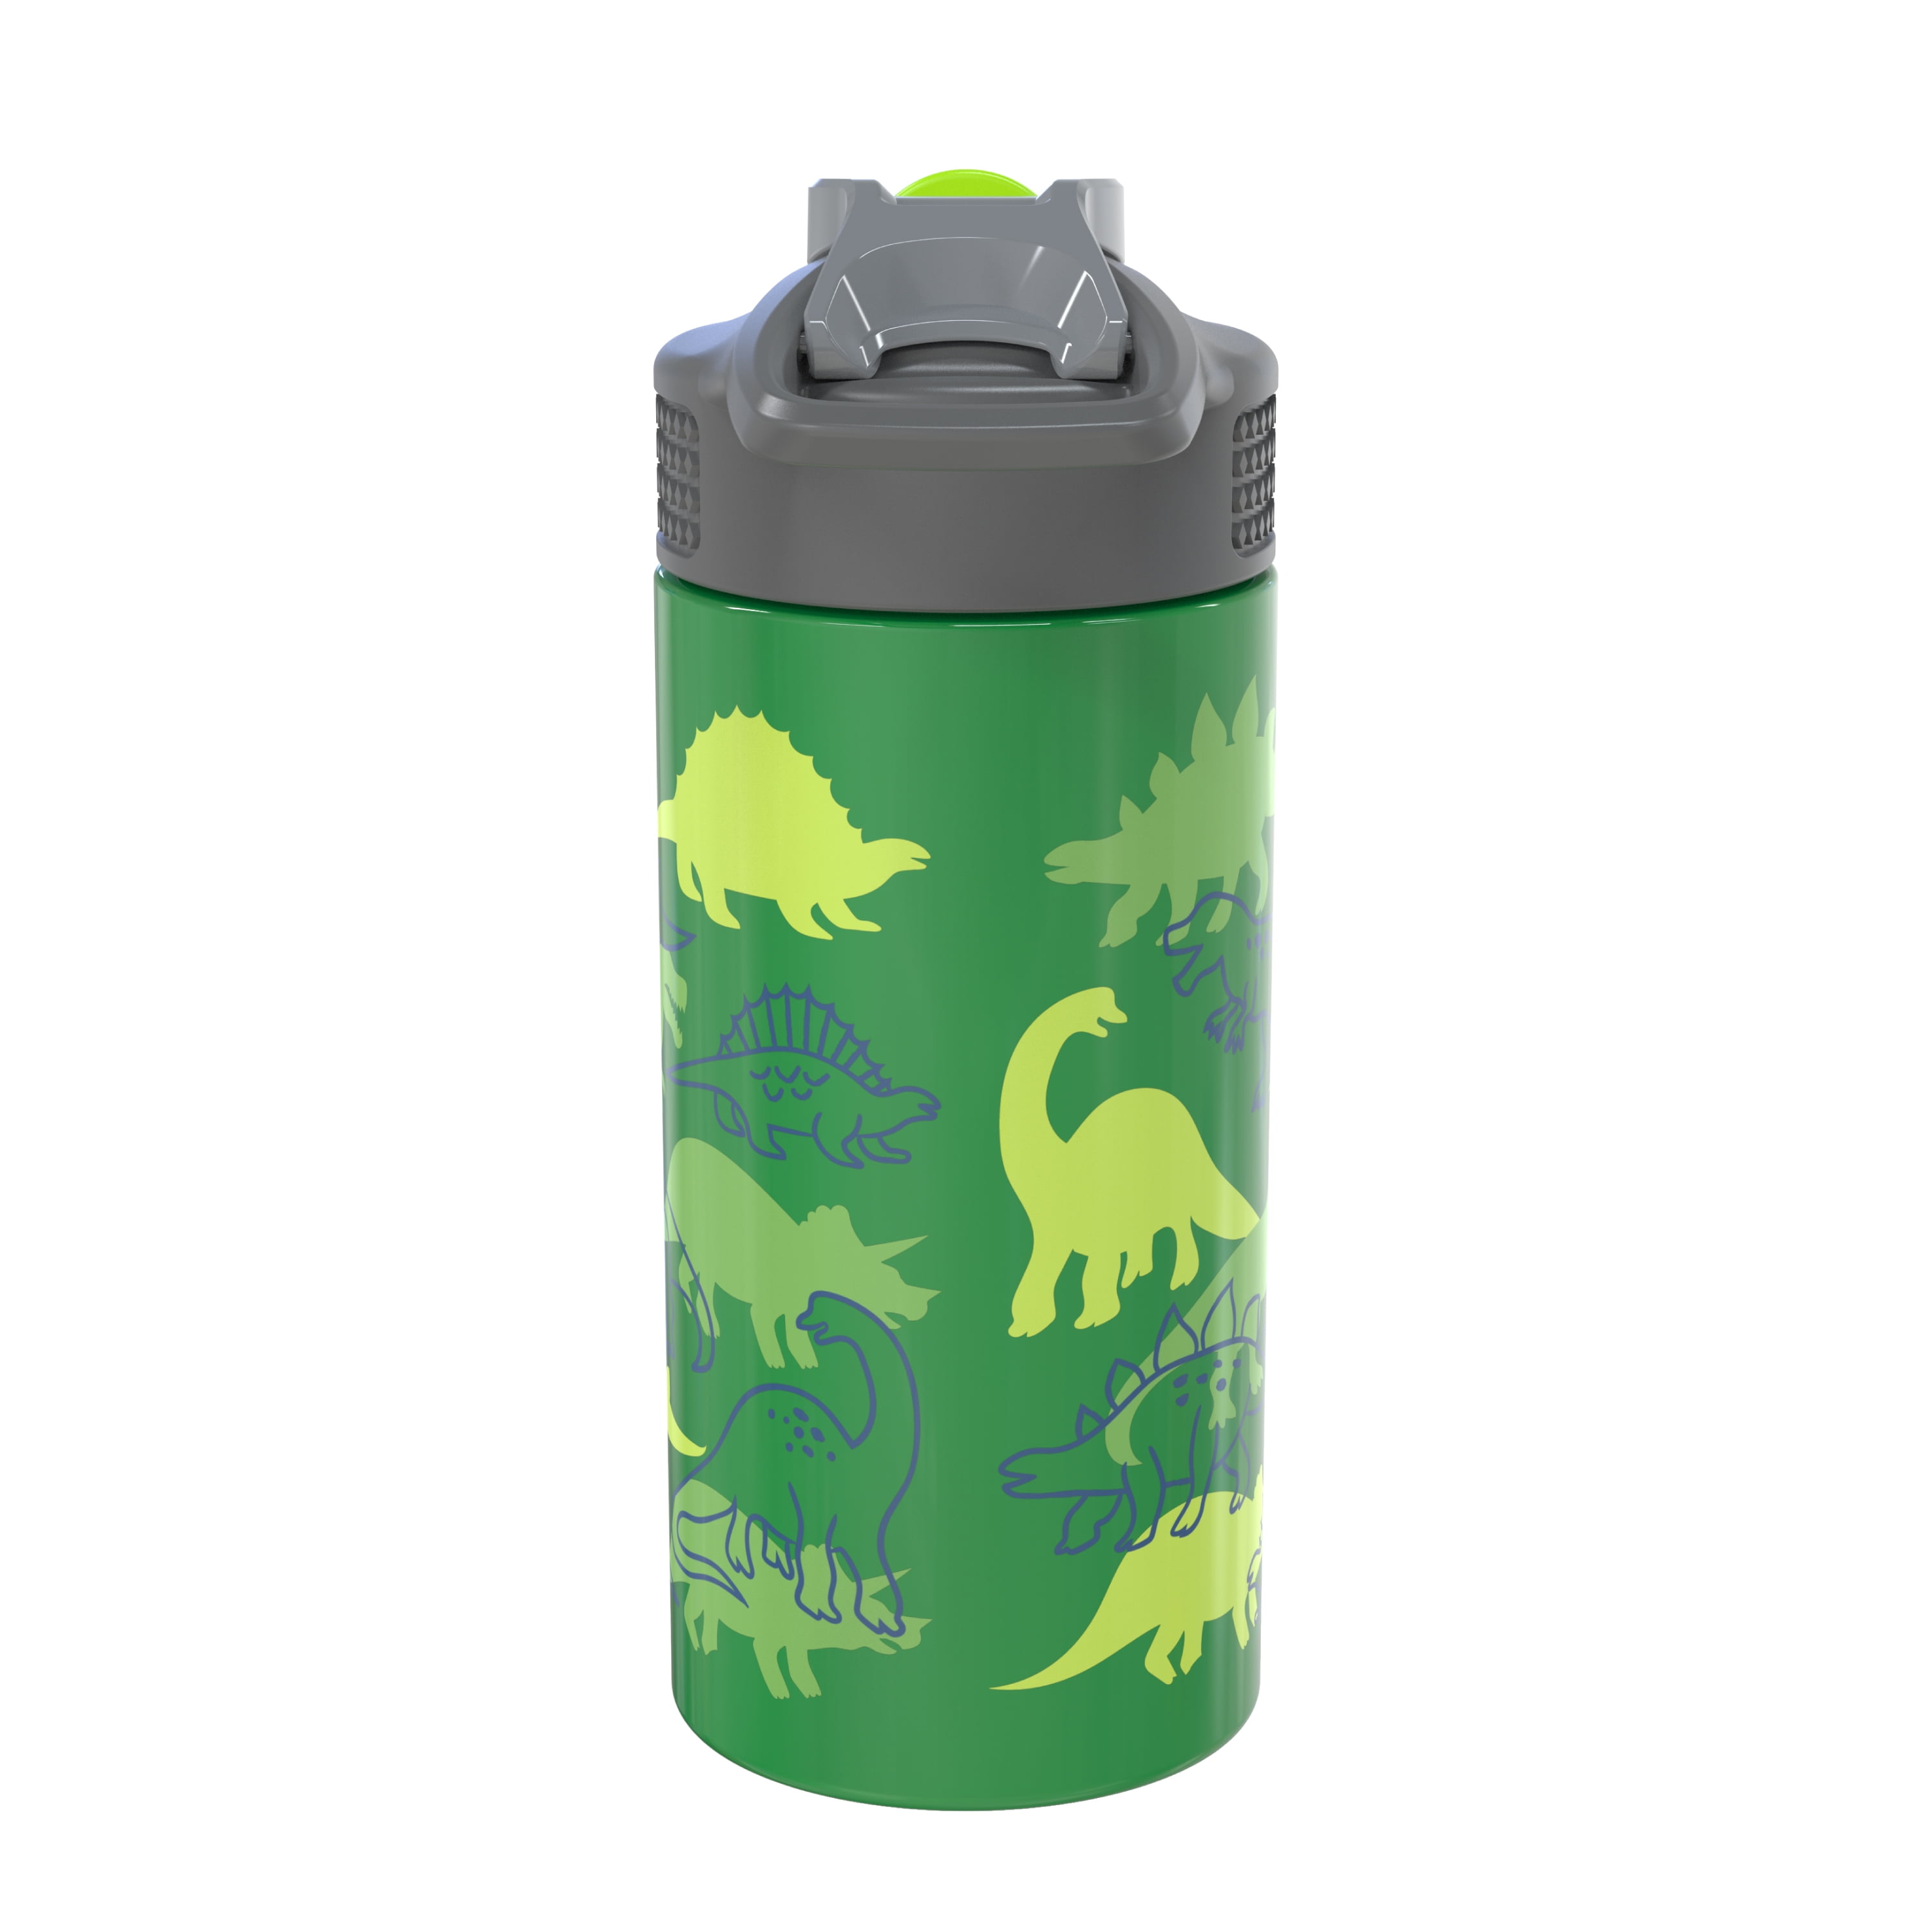 Zak Designs Dino Camo 14 Ounce Stainless Steel Vacuum Insulated Water Bottle, Dinosaurs